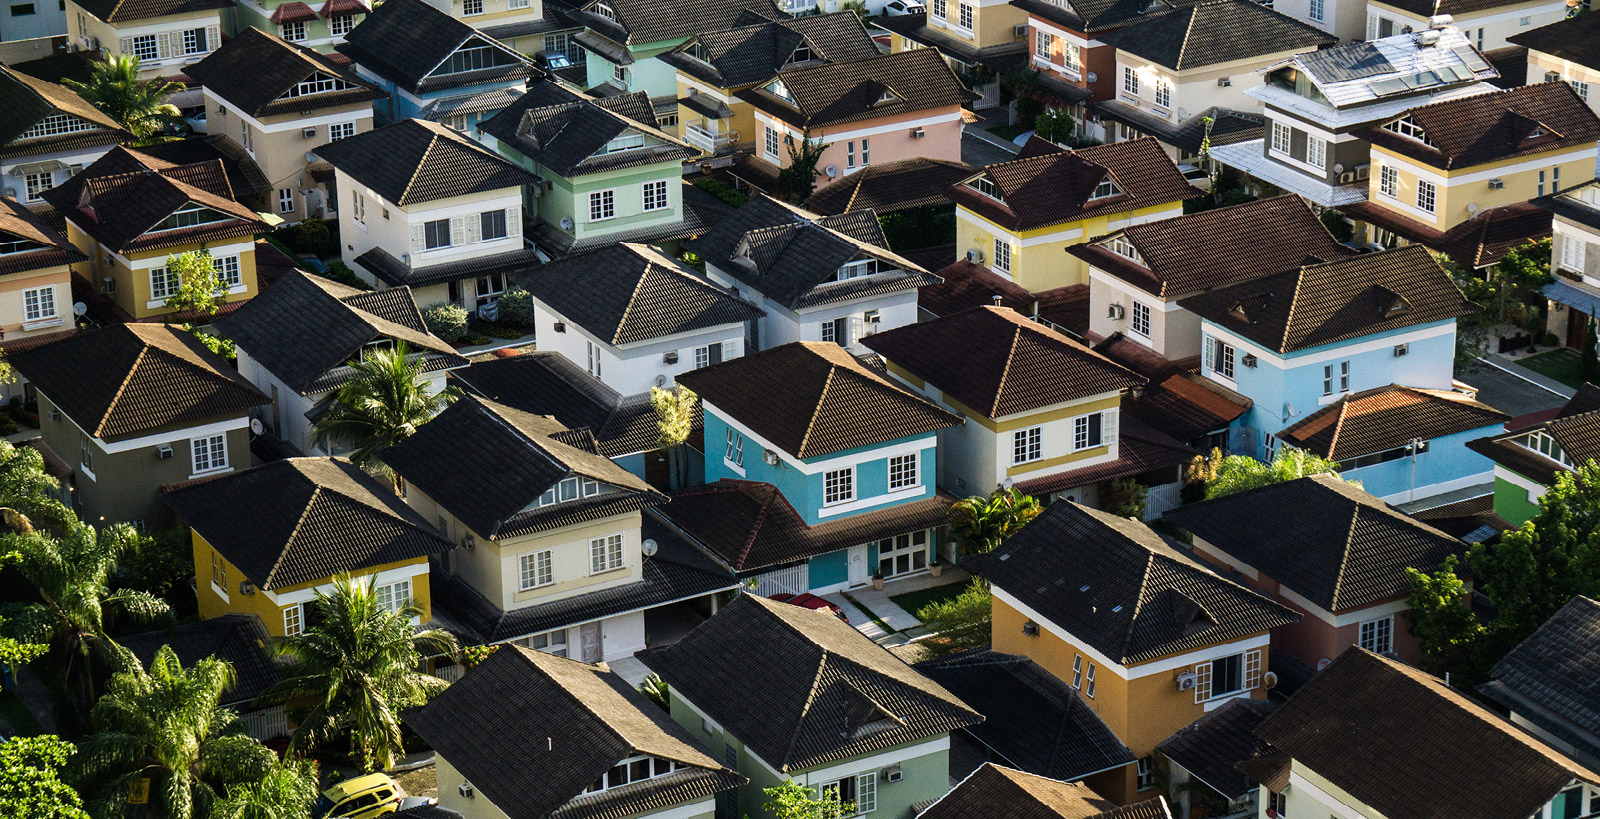 An aerial photo of a suburb of colorful, tightly-packed homes in a large suburb.